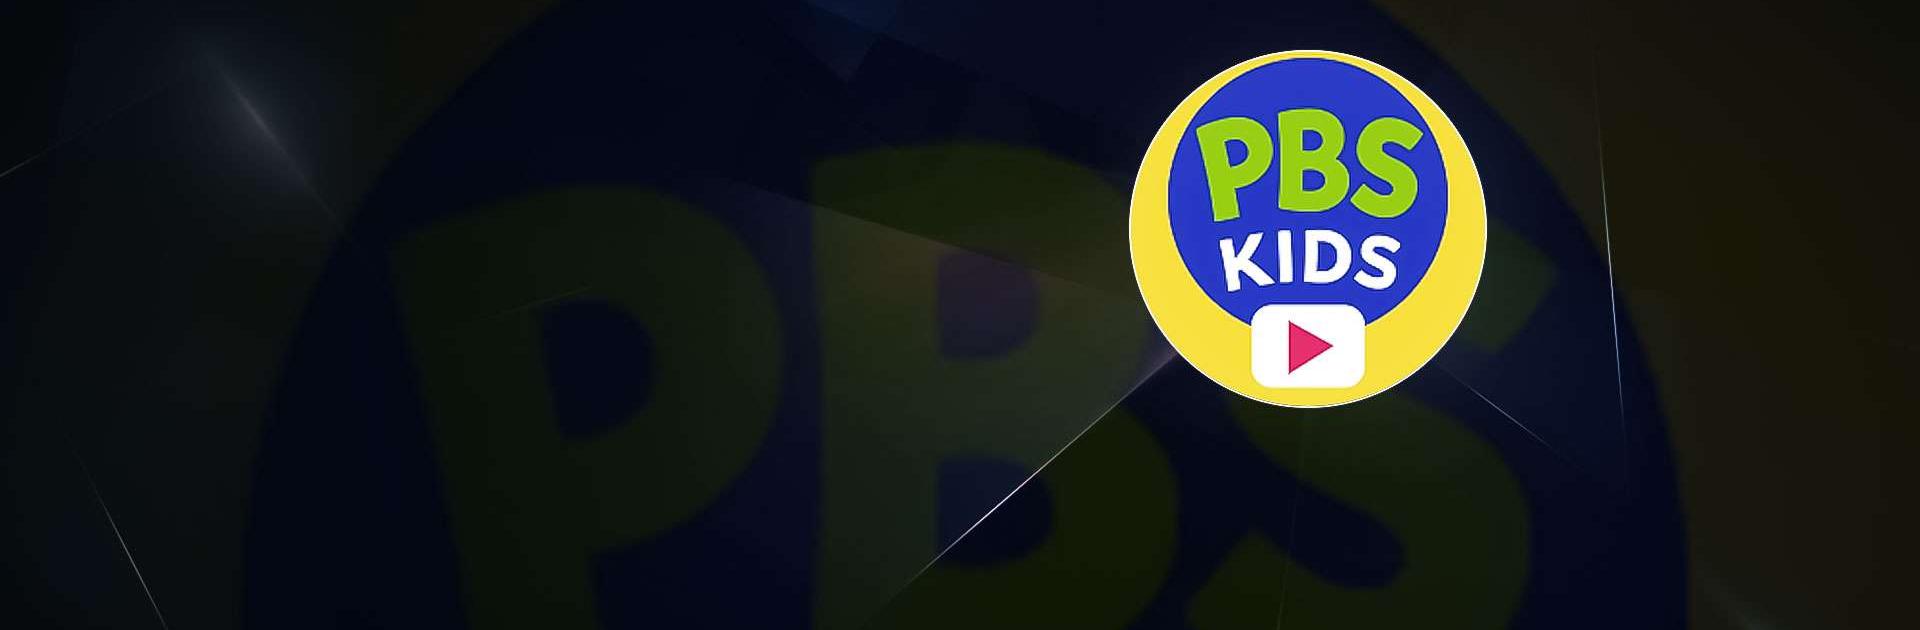 Play Pbs Kids Online For Free On